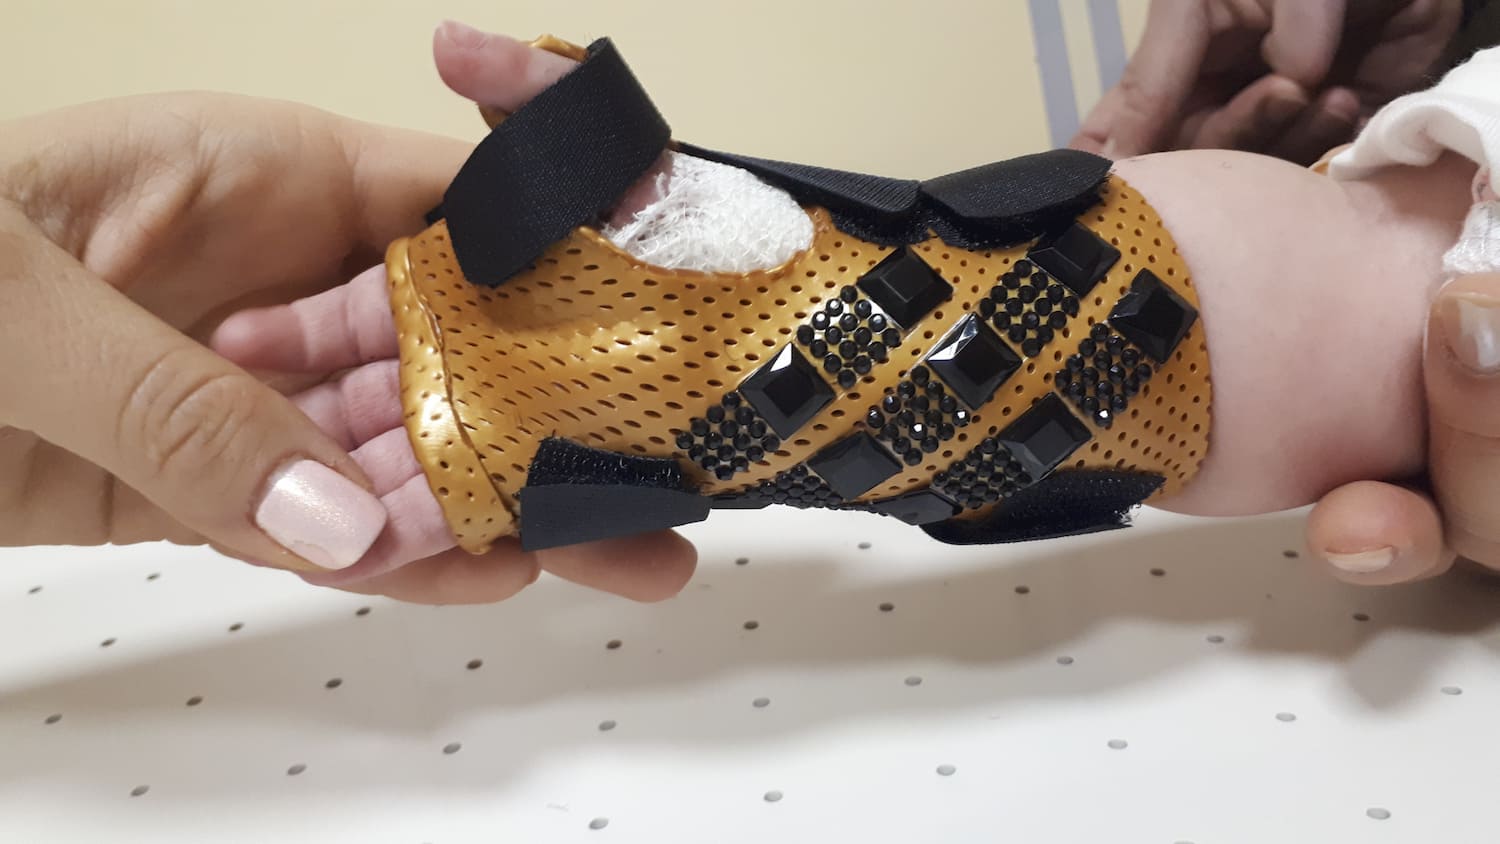 Orthosis for the congenital malformation Triphalangeal thumb